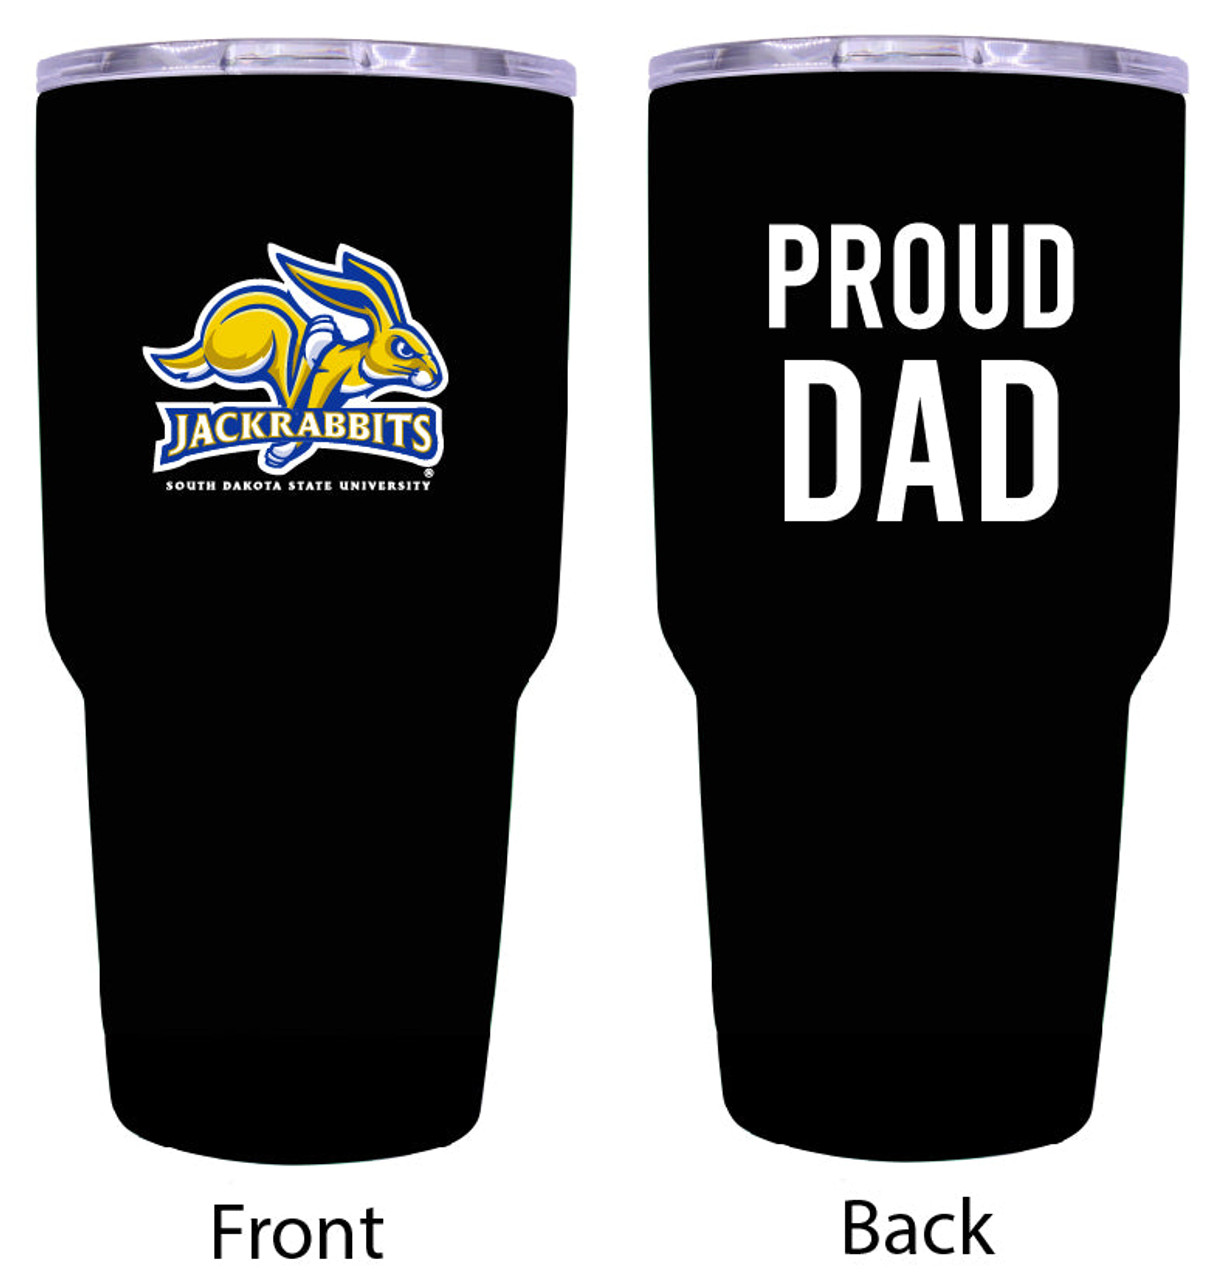 South Dakota State Jackrabbits Proud Dad 24 oz Insulated Stainless Steel Tumblers Black.